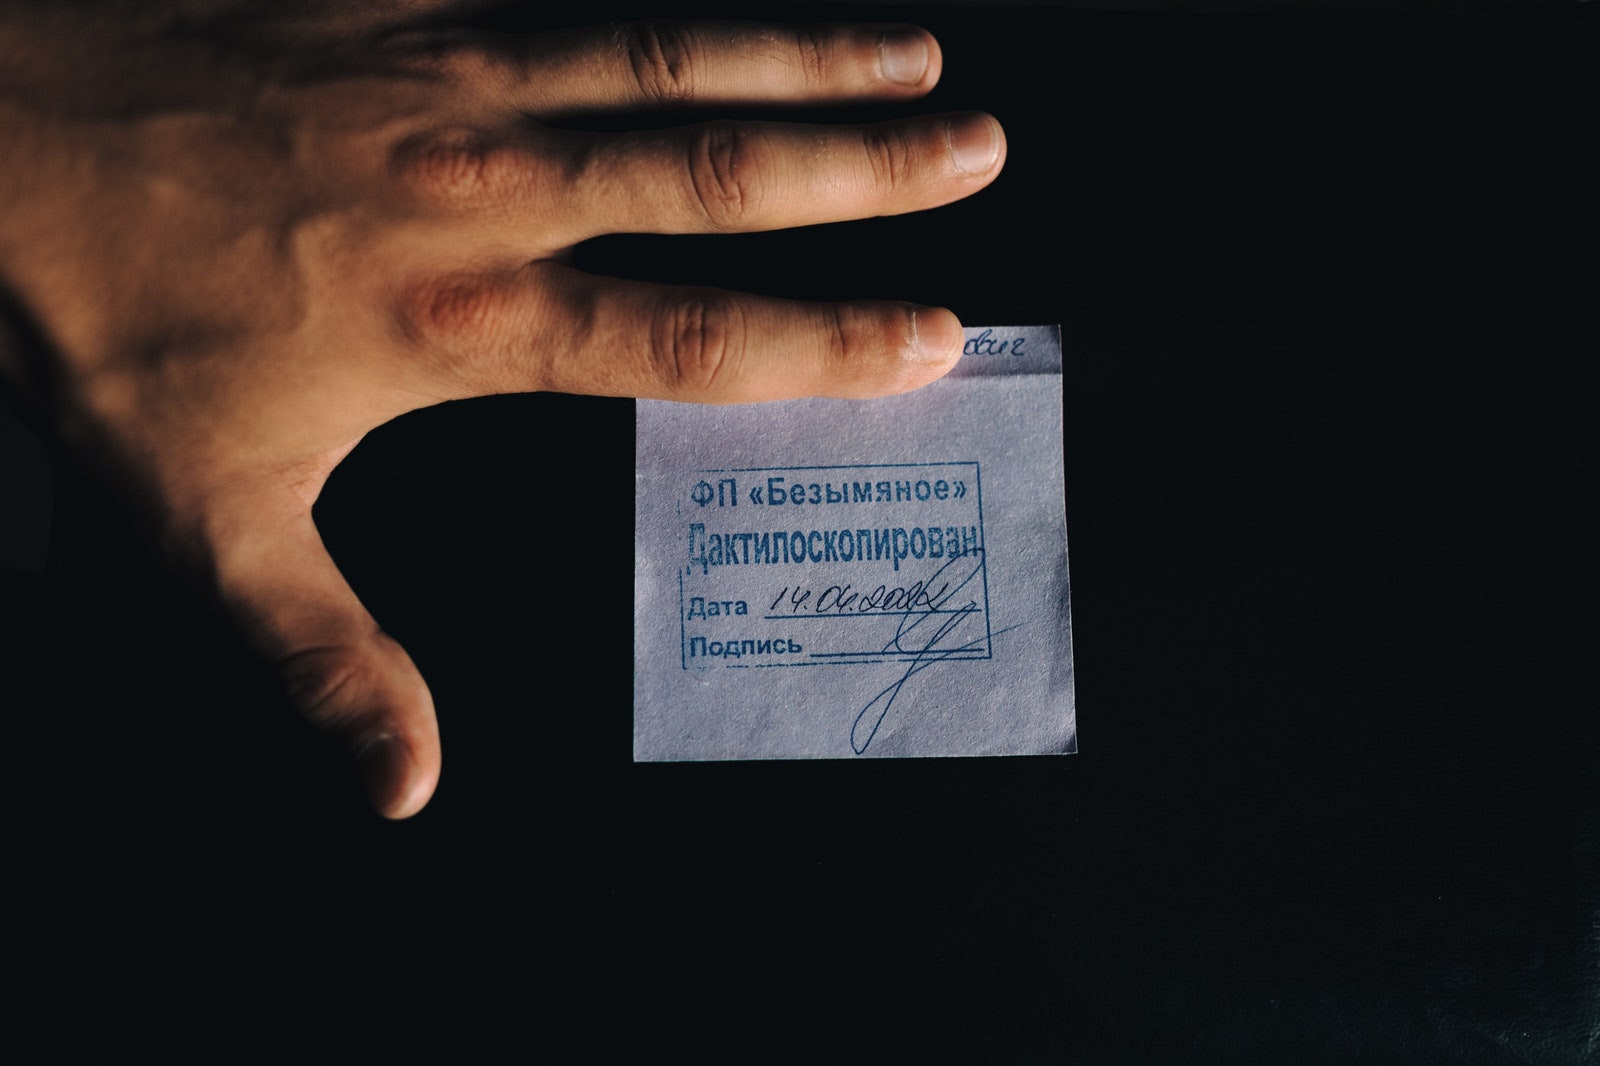 A hand touches a paper filtration receipt issued to a Ukranian citizen.